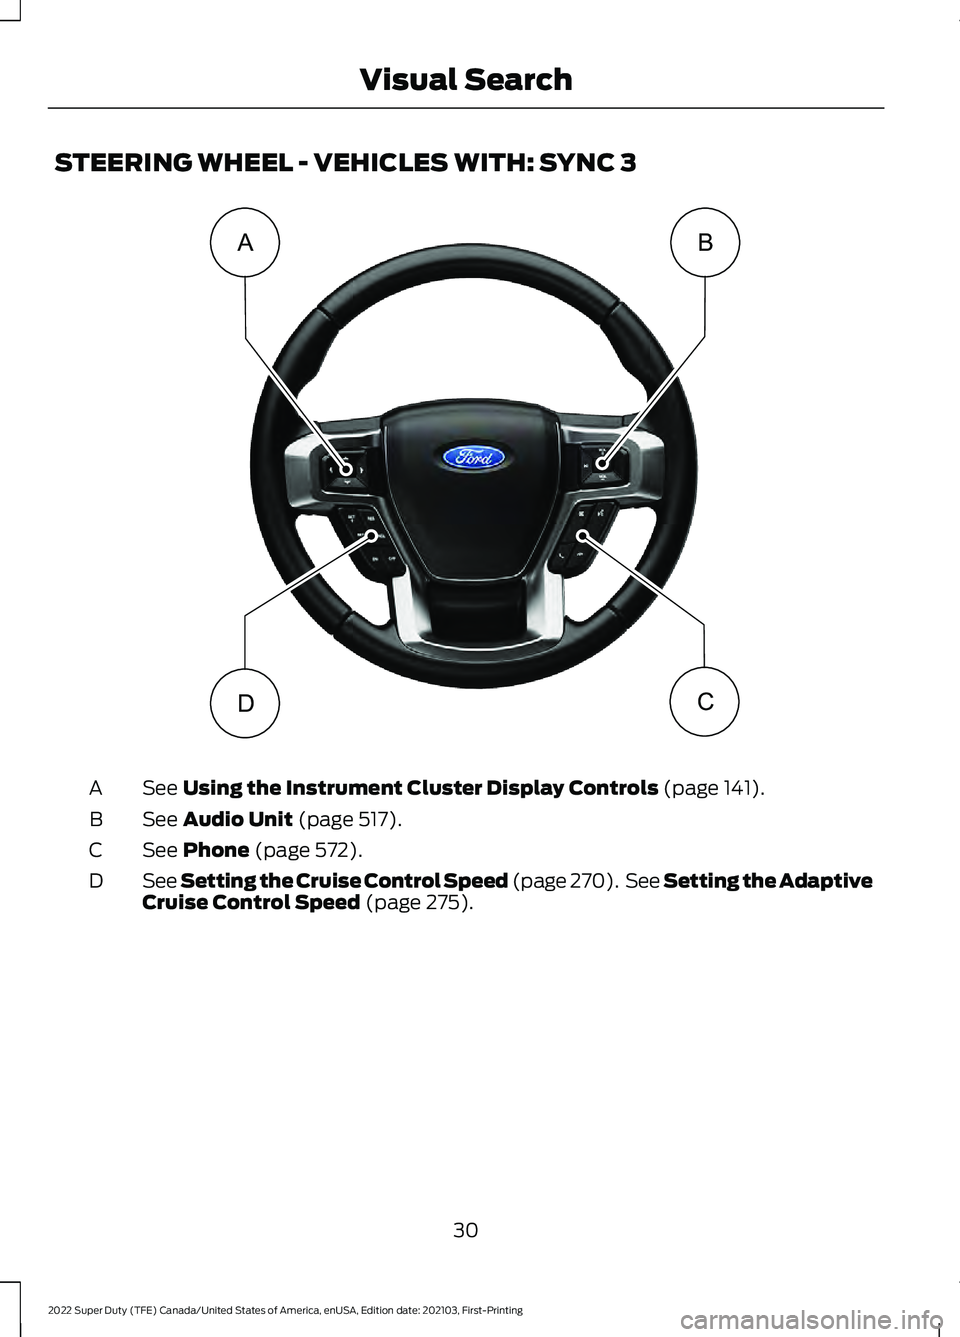 FORD F-450 2022  Owners Manual STEERING WHEEL - VEHICLES WITH: SYNC 3
See Using the Instrument Cluster Display Controls (page 141).
A
See 
Audio Unit (page 517).
B
See 
Phone (page 572).
C
See Setting the Cruise Control Speed (page